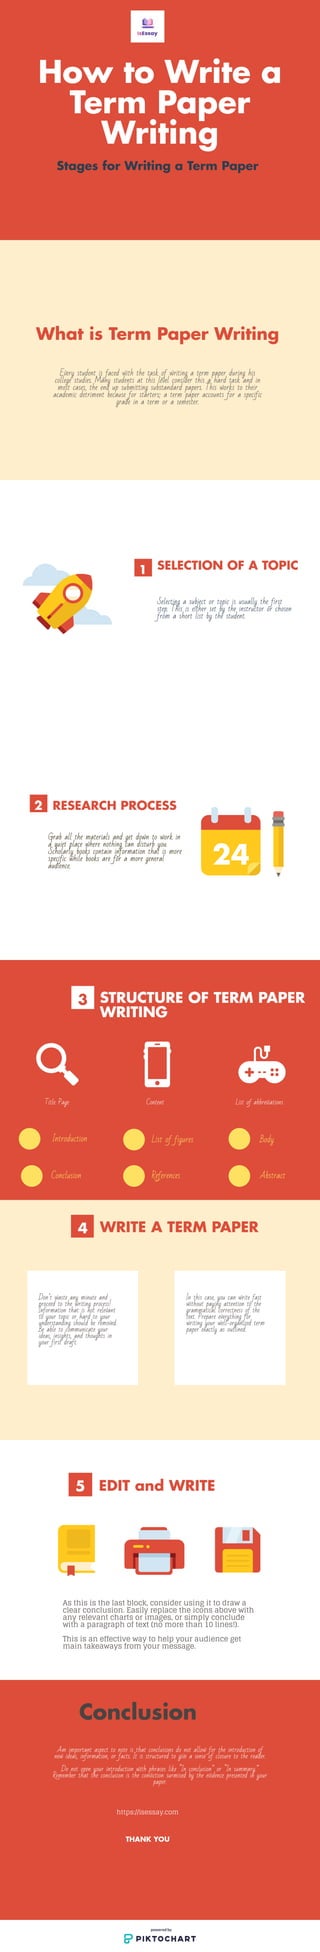 How to write a term paper : Tips and Guide